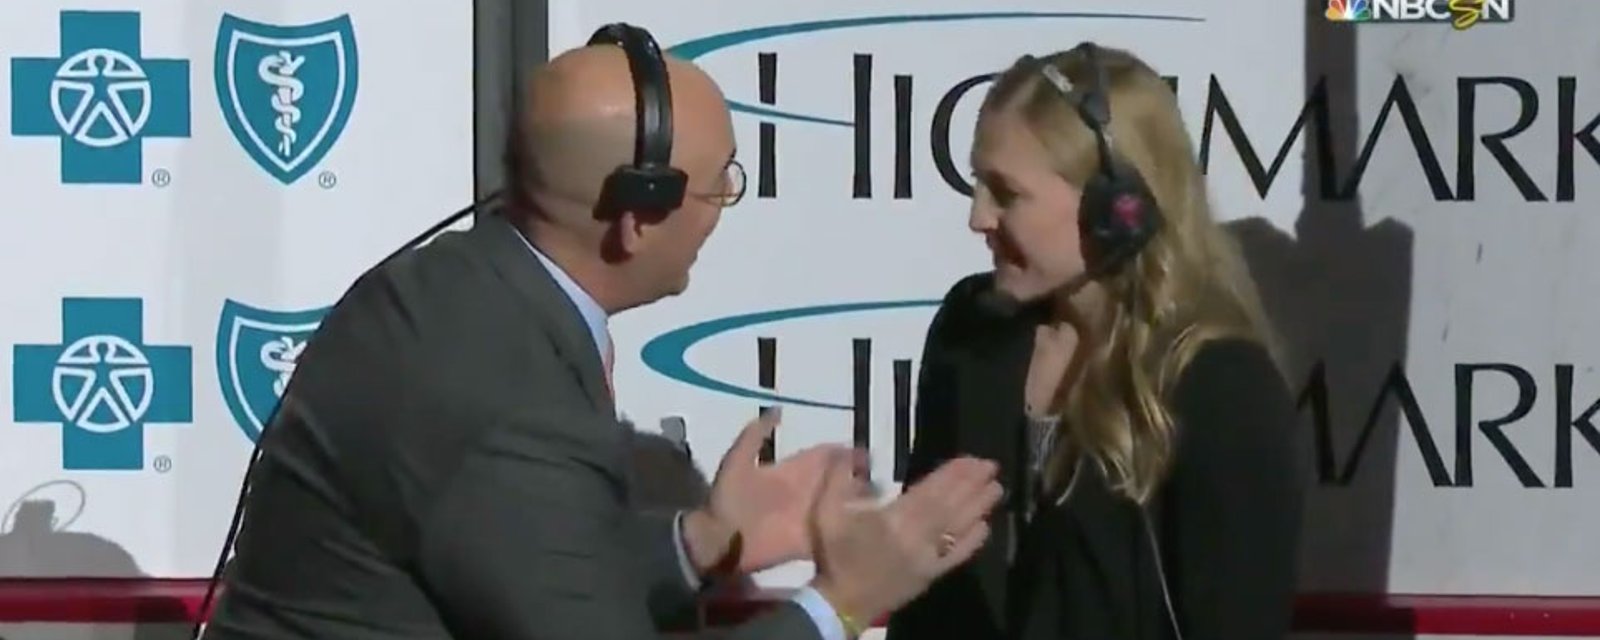 Pierre McGuire mansplains hockey to Olympic Gold medalist Kendall Coyne in most condescending way 